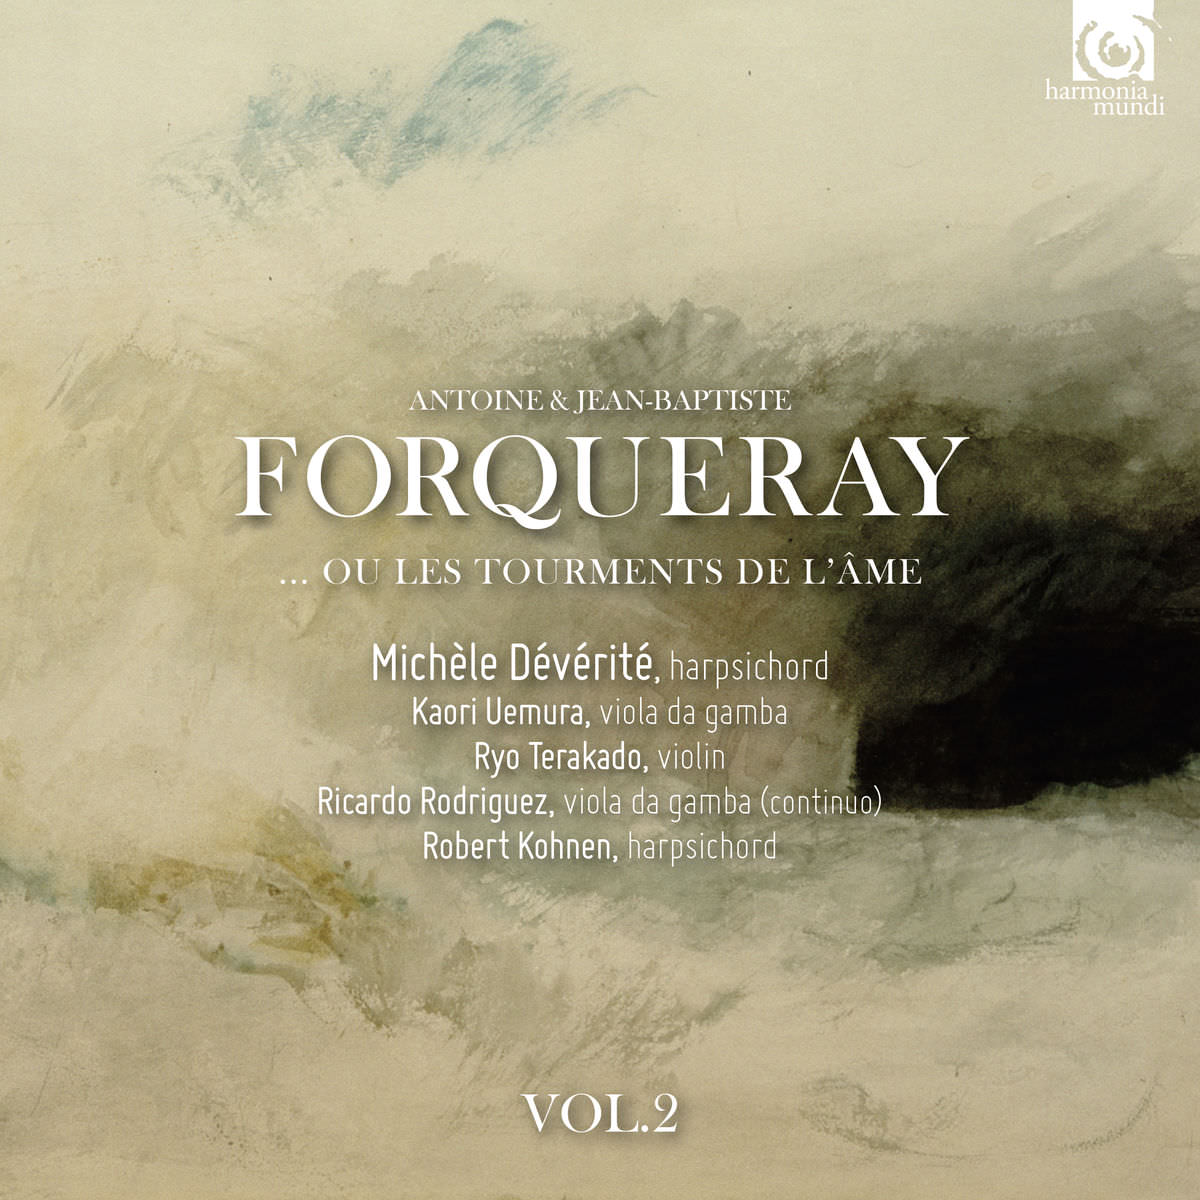 Michele Deverite - The Forquerays, or the Torments of the Soul, Vol. 2 (2018) [FLAC 24bit/48kHz]